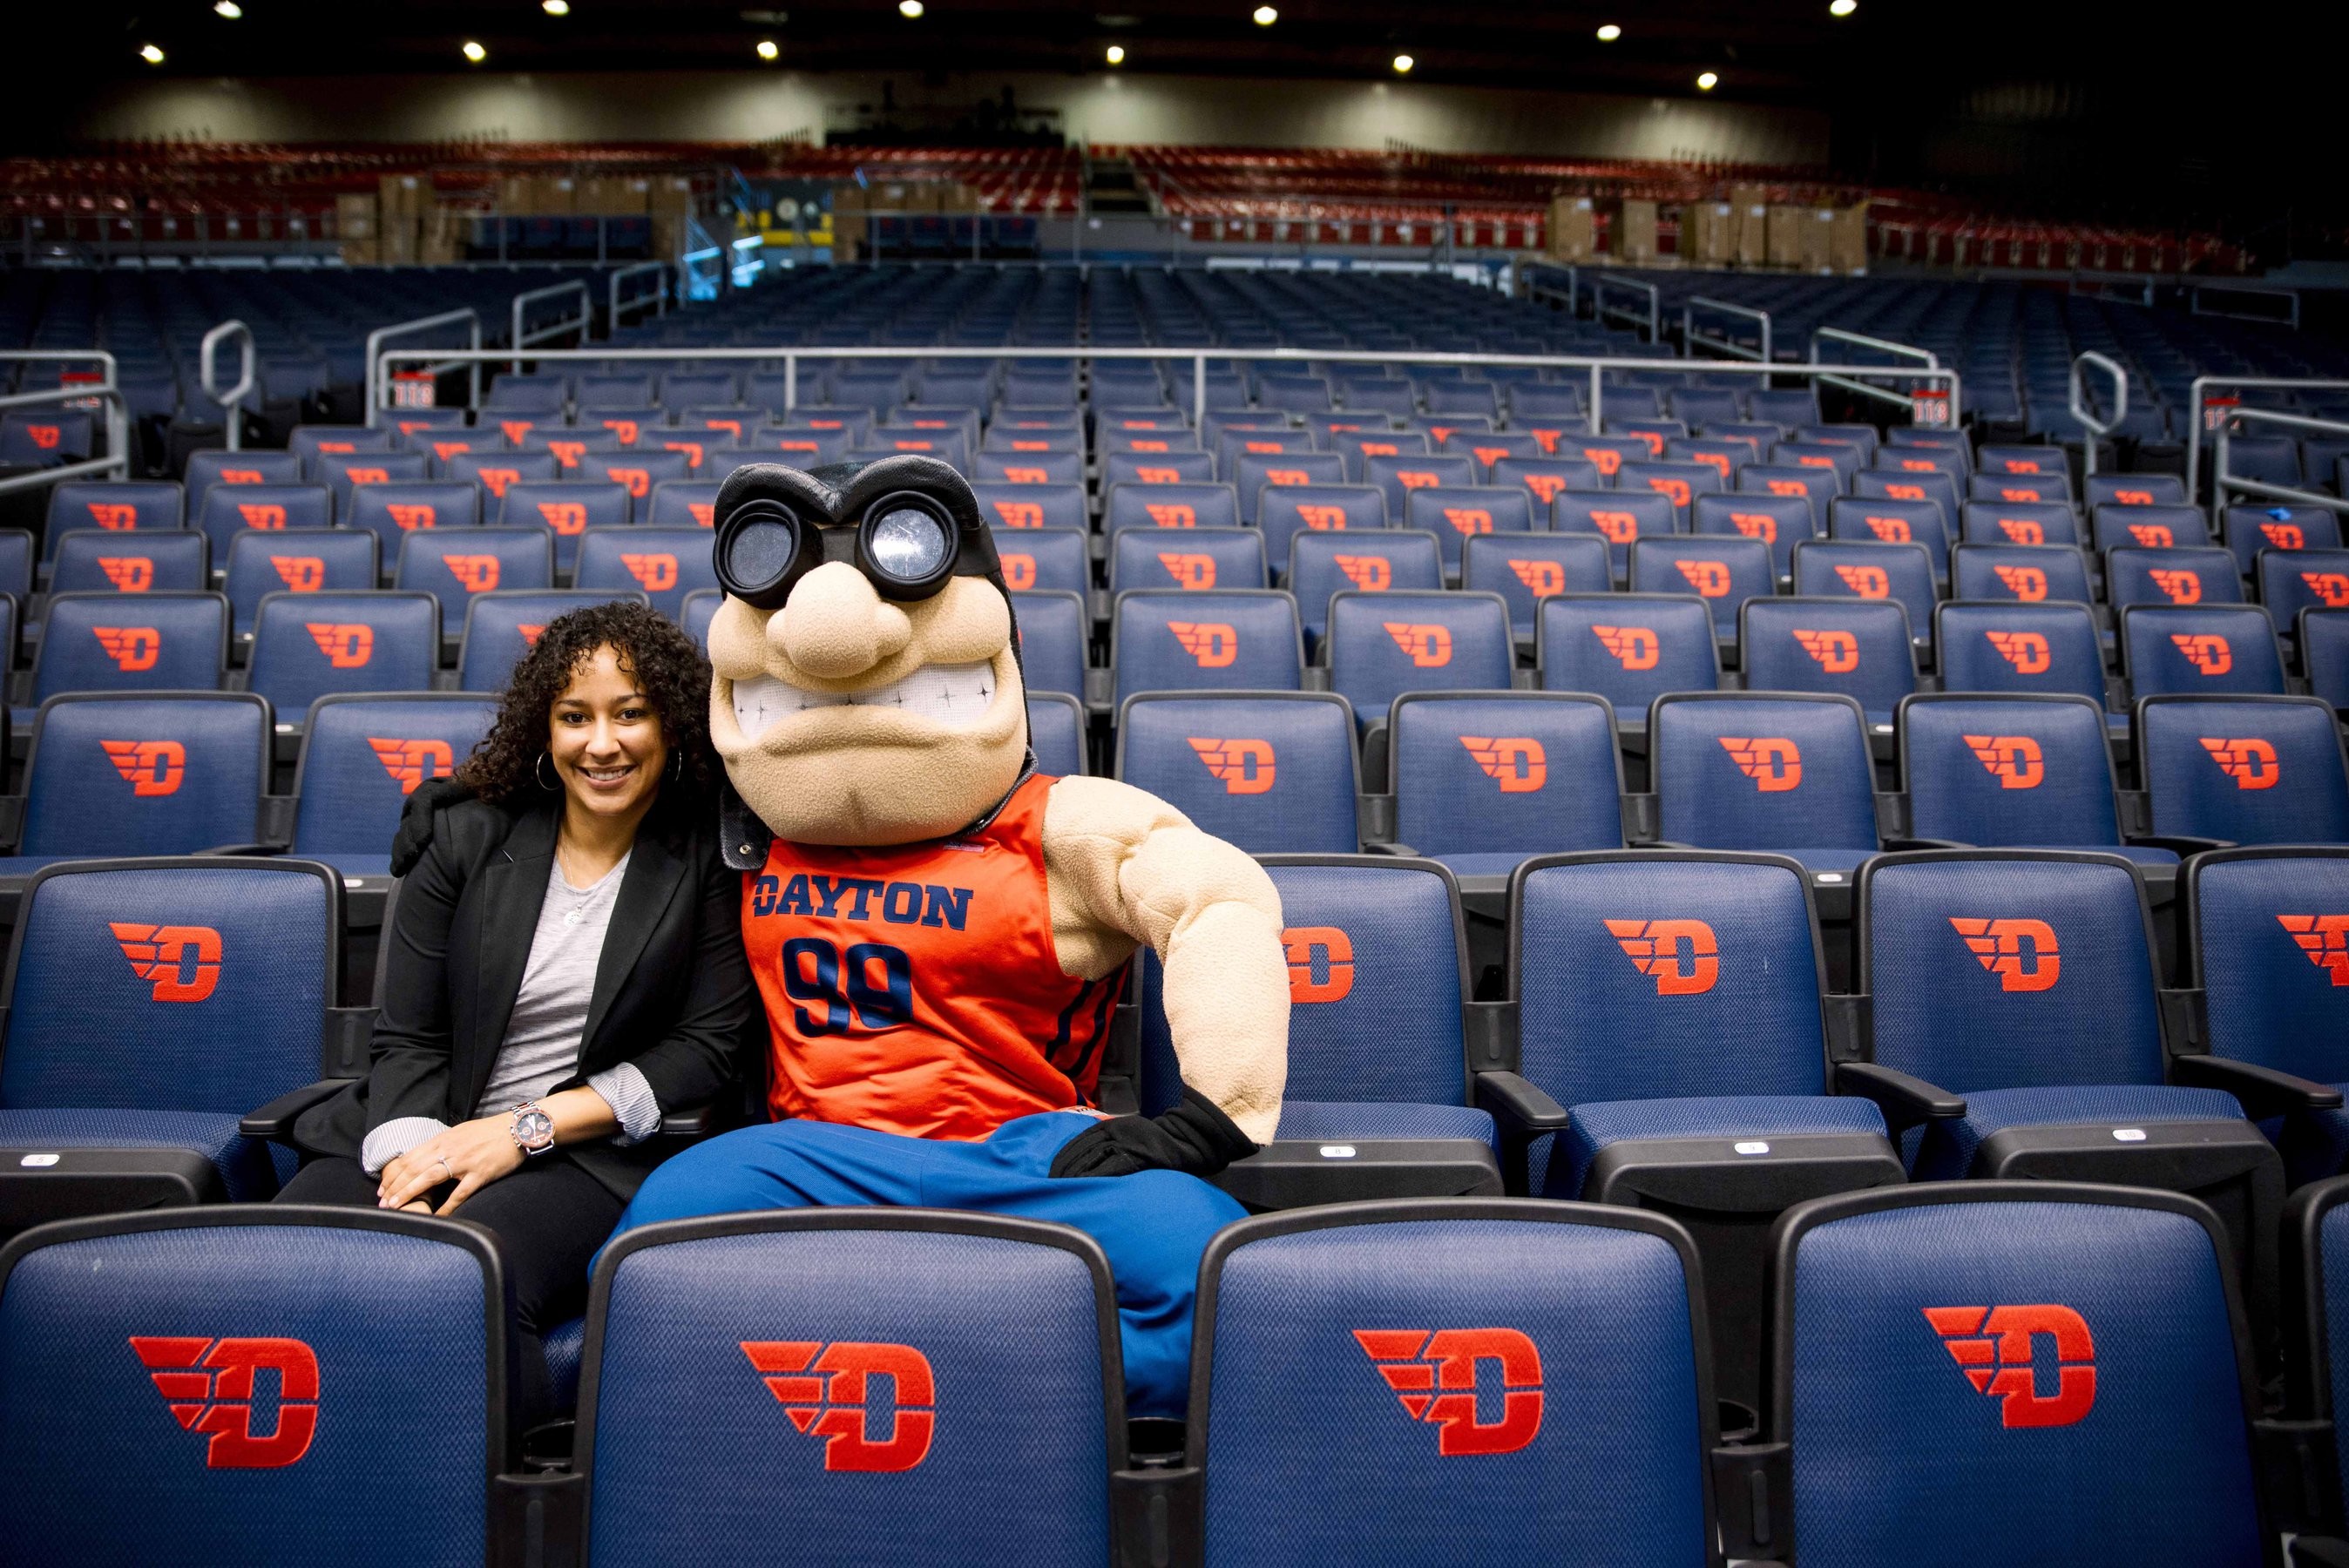 University of Dayton's mascot, Rudy Flyer, poses for a seated photo with a student in UD Arena